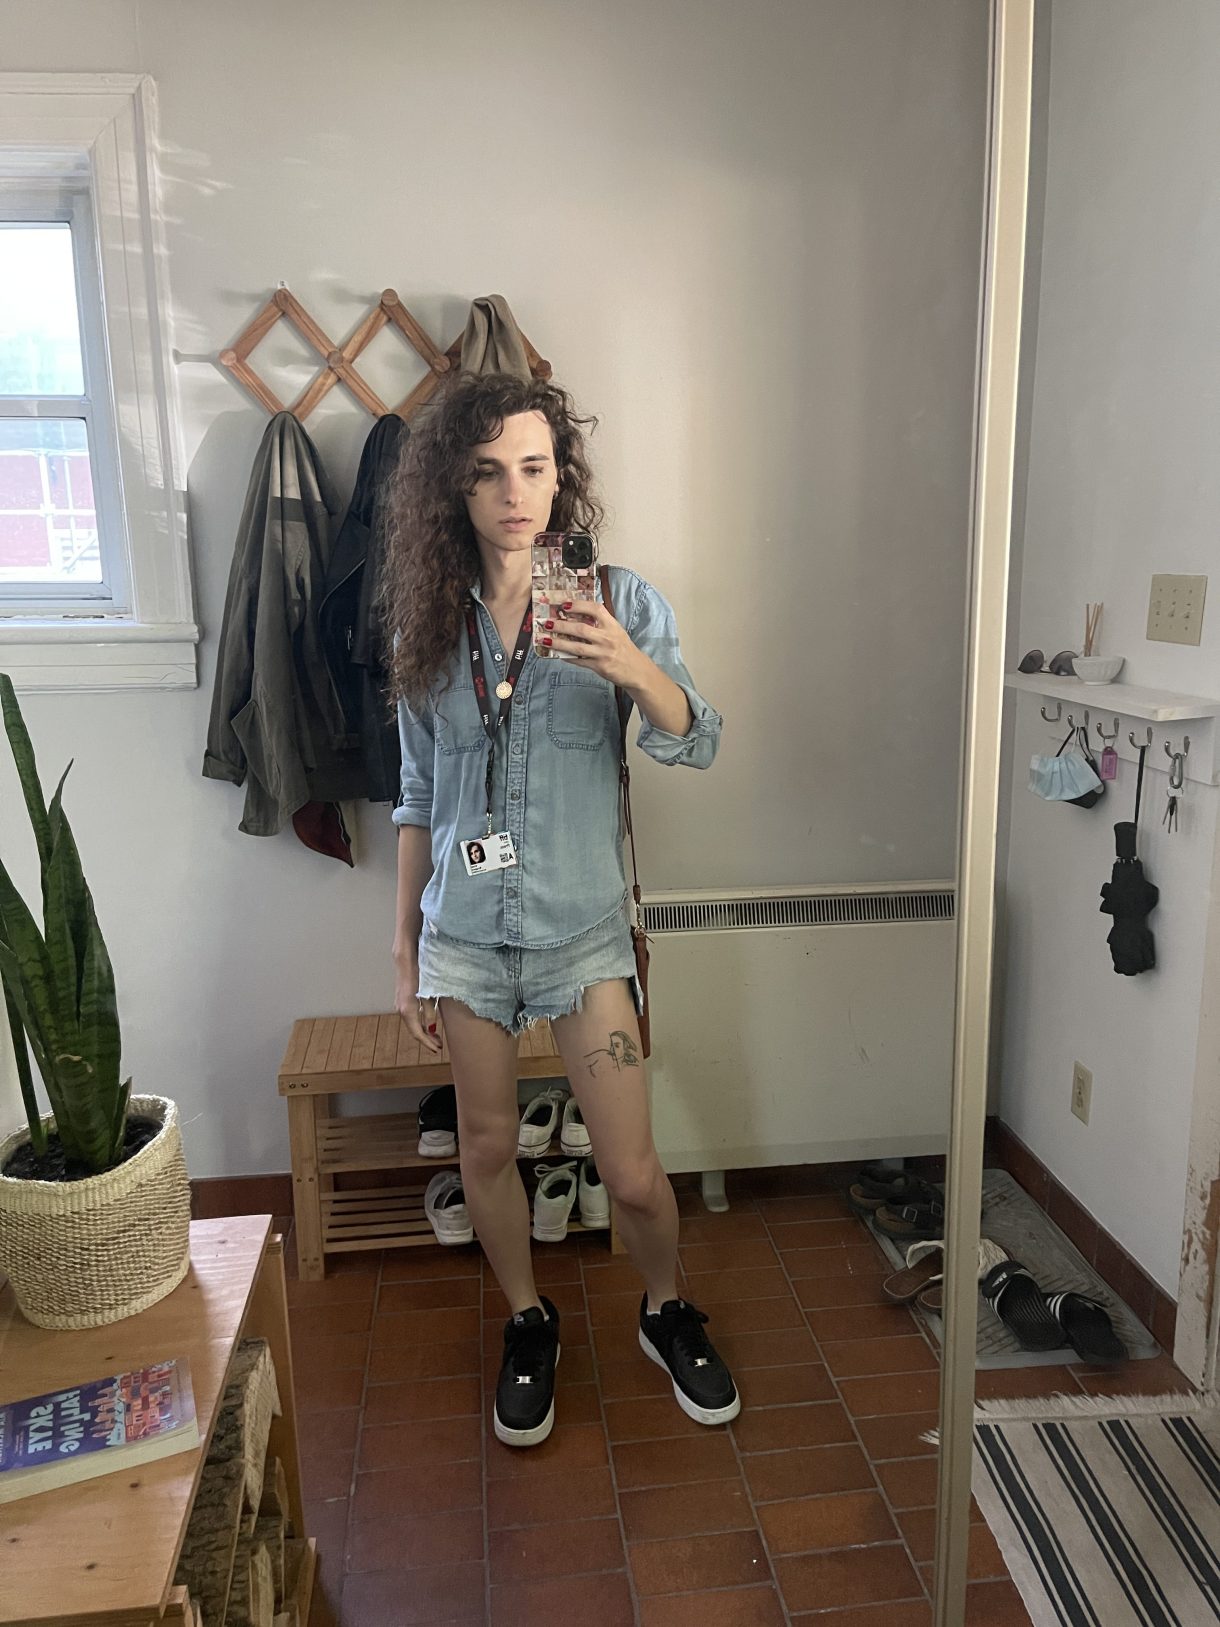 Drew, a white woman with long curly brown hair, stands in a denim shirt, matching denim jorts, sneakers, taking a mirror selfie with her TIFF press pass around her neck